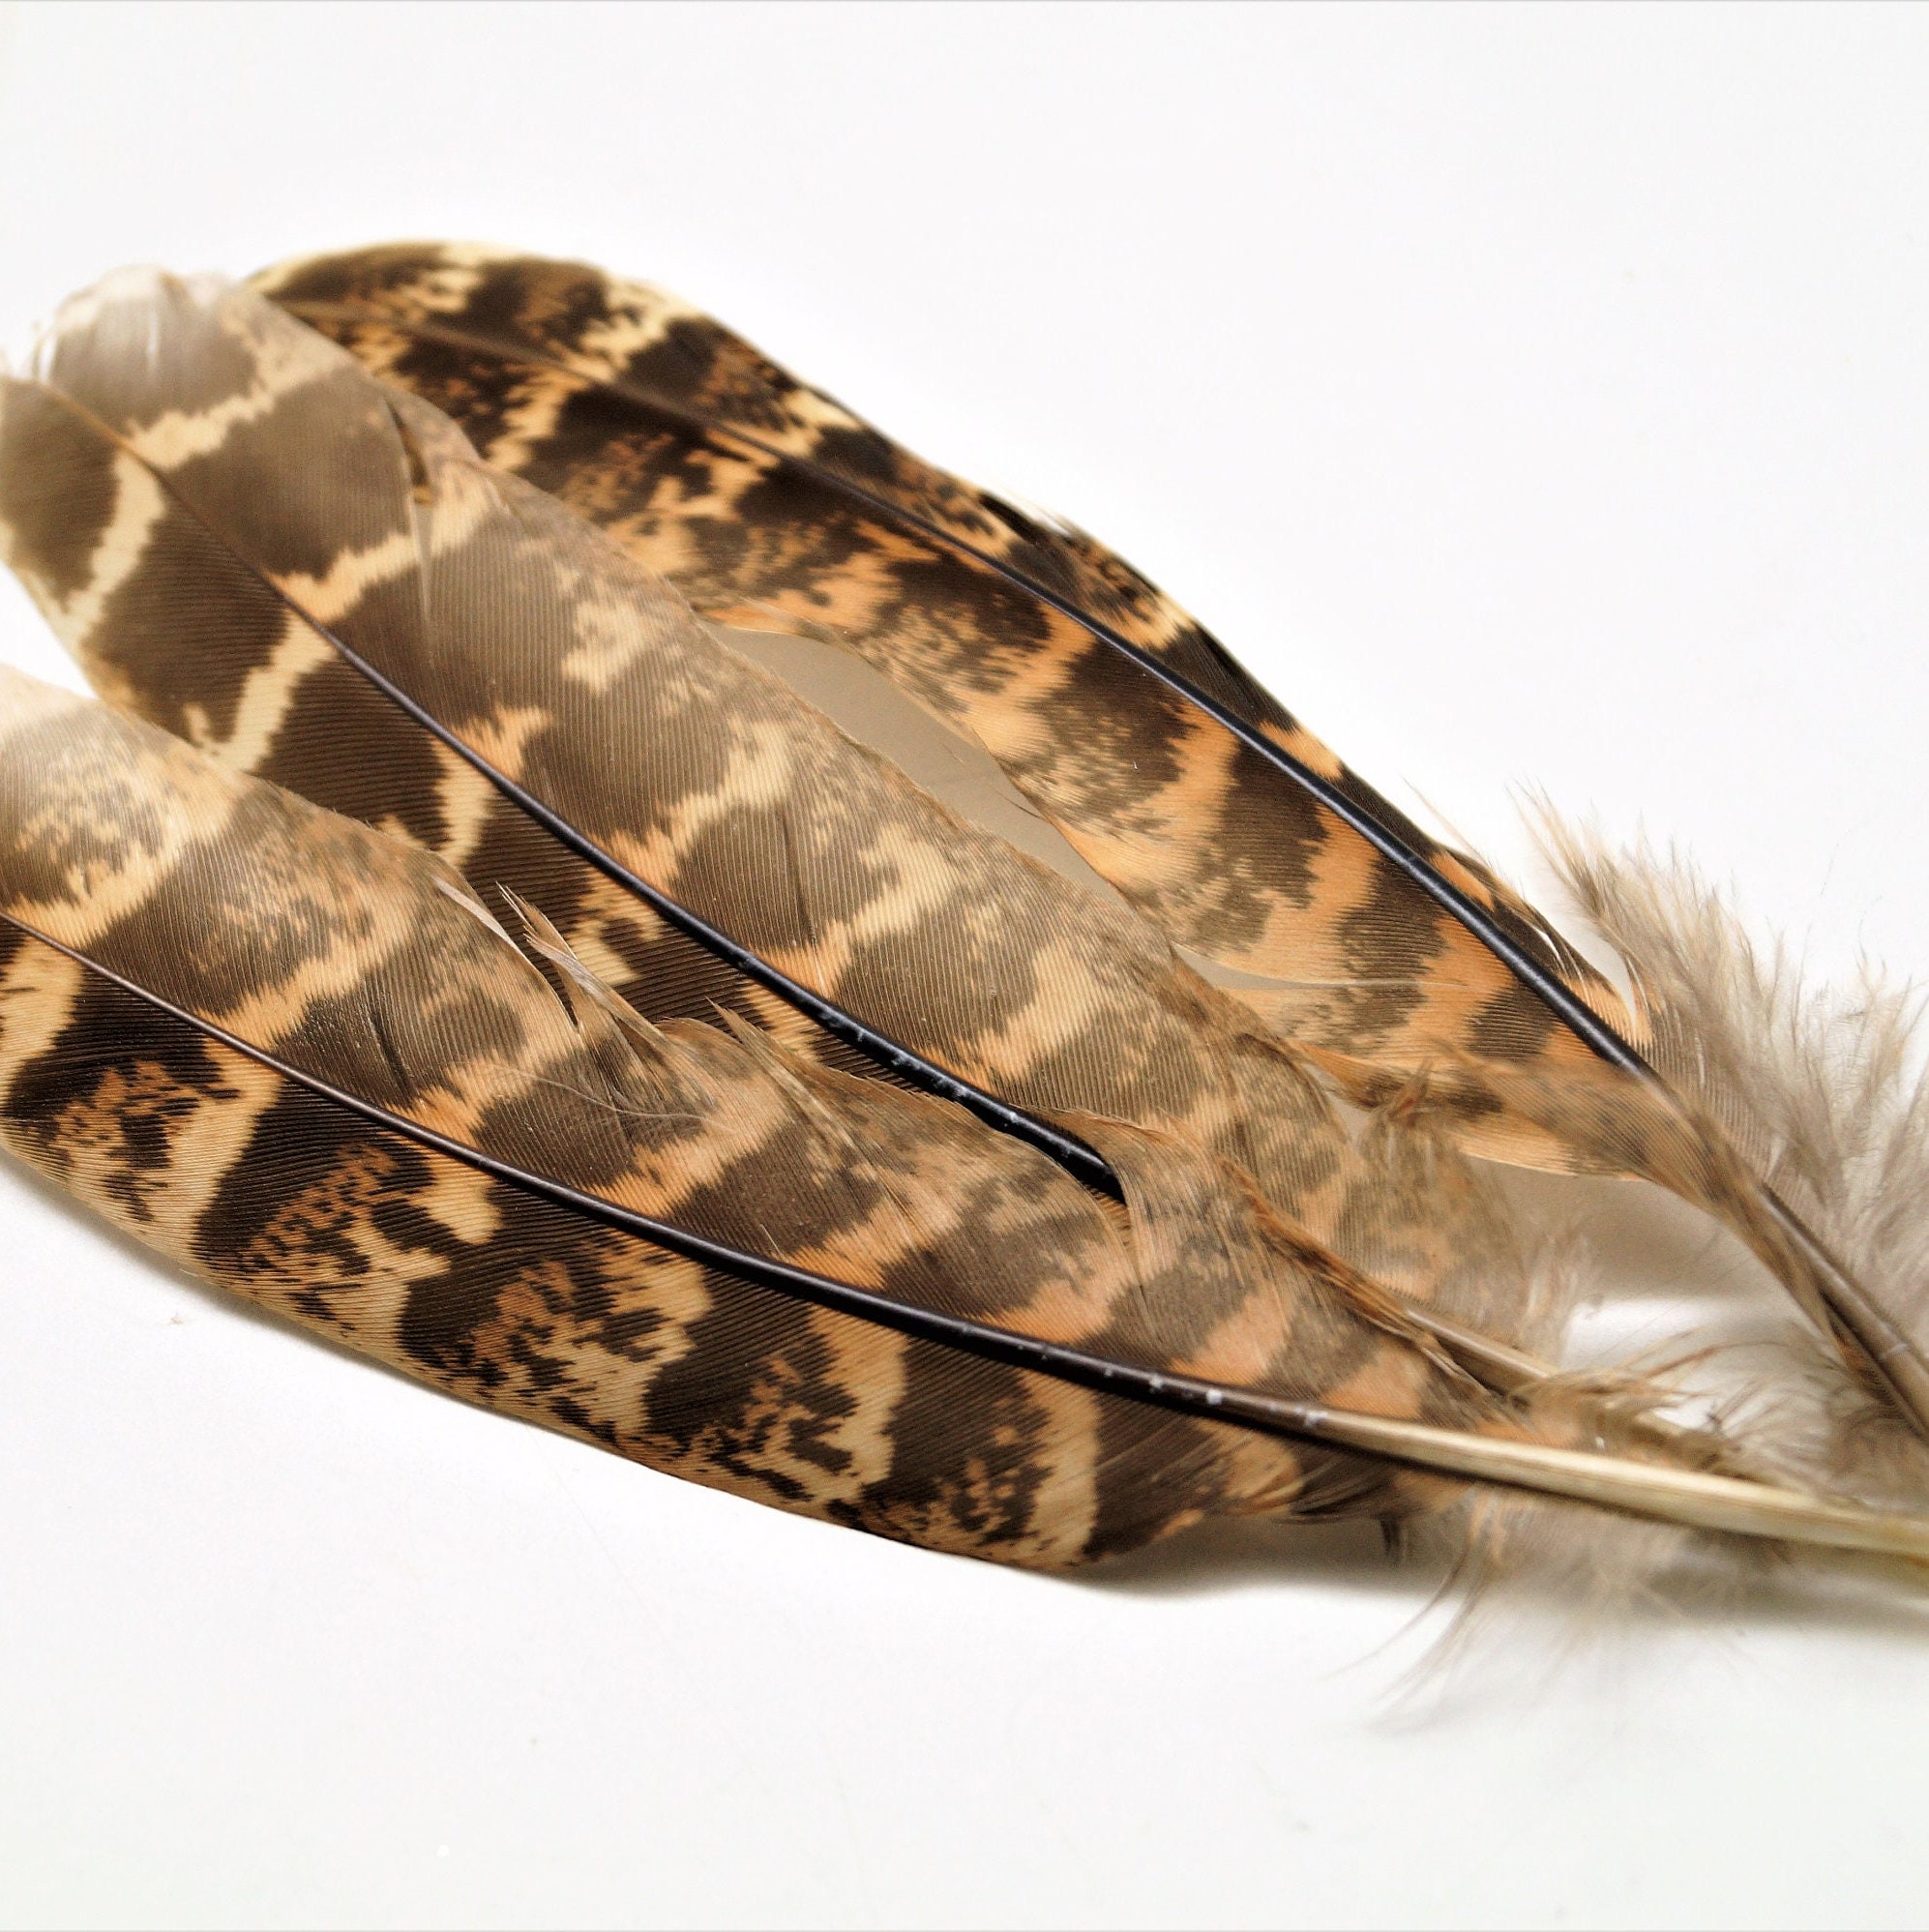 Feathers Gold and Silver 10-15 Cm, Set of 10 